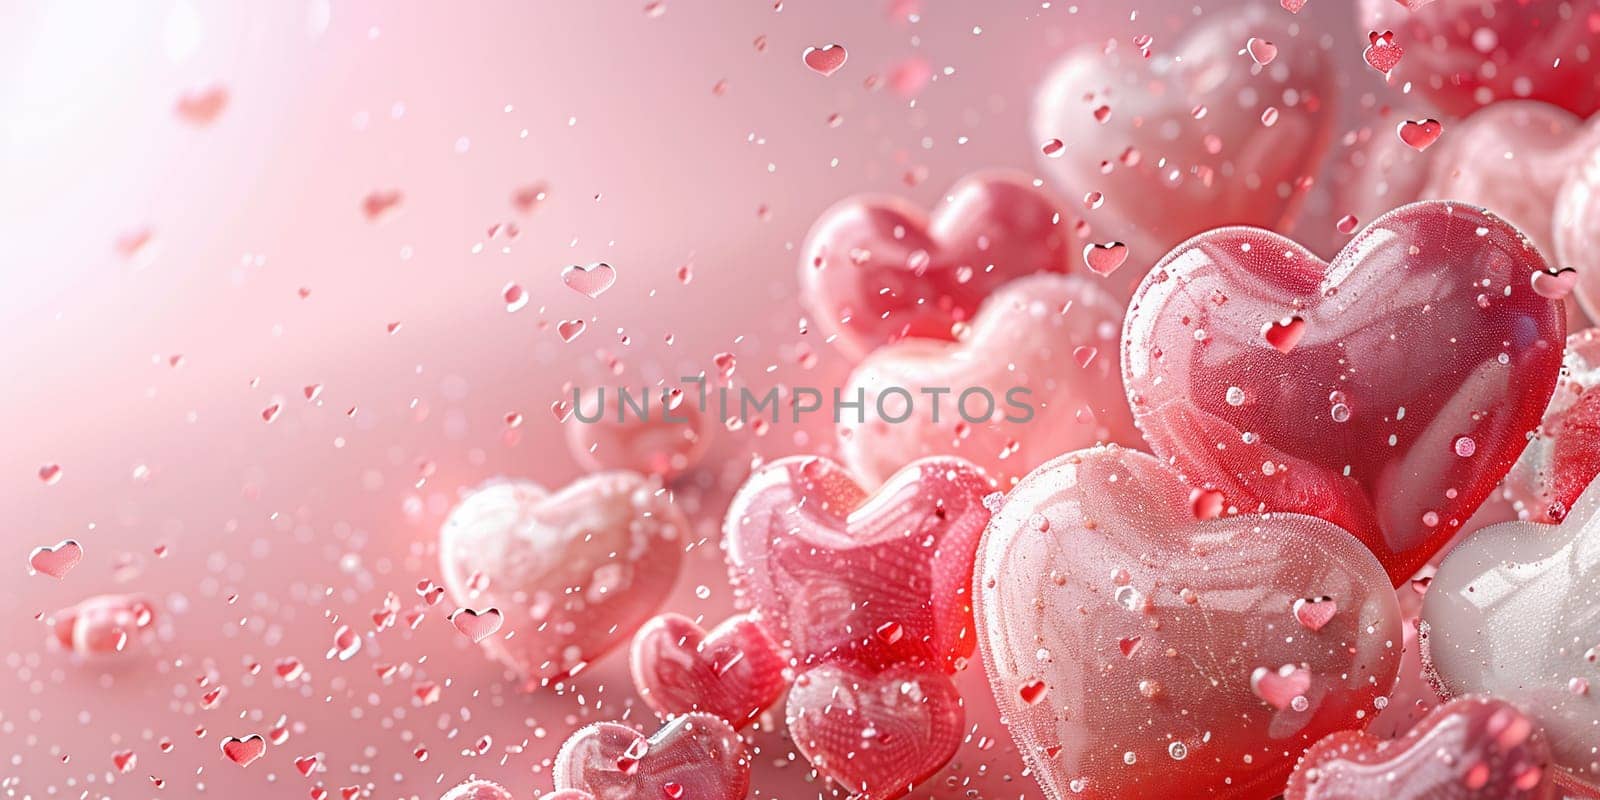 Balloon Hearts. holiday illustration of bunch of red and pink balloon hearts and glittering confetti. Happy Valentines Day. Festive romantic decoration. Wedding concept. by Andelov13